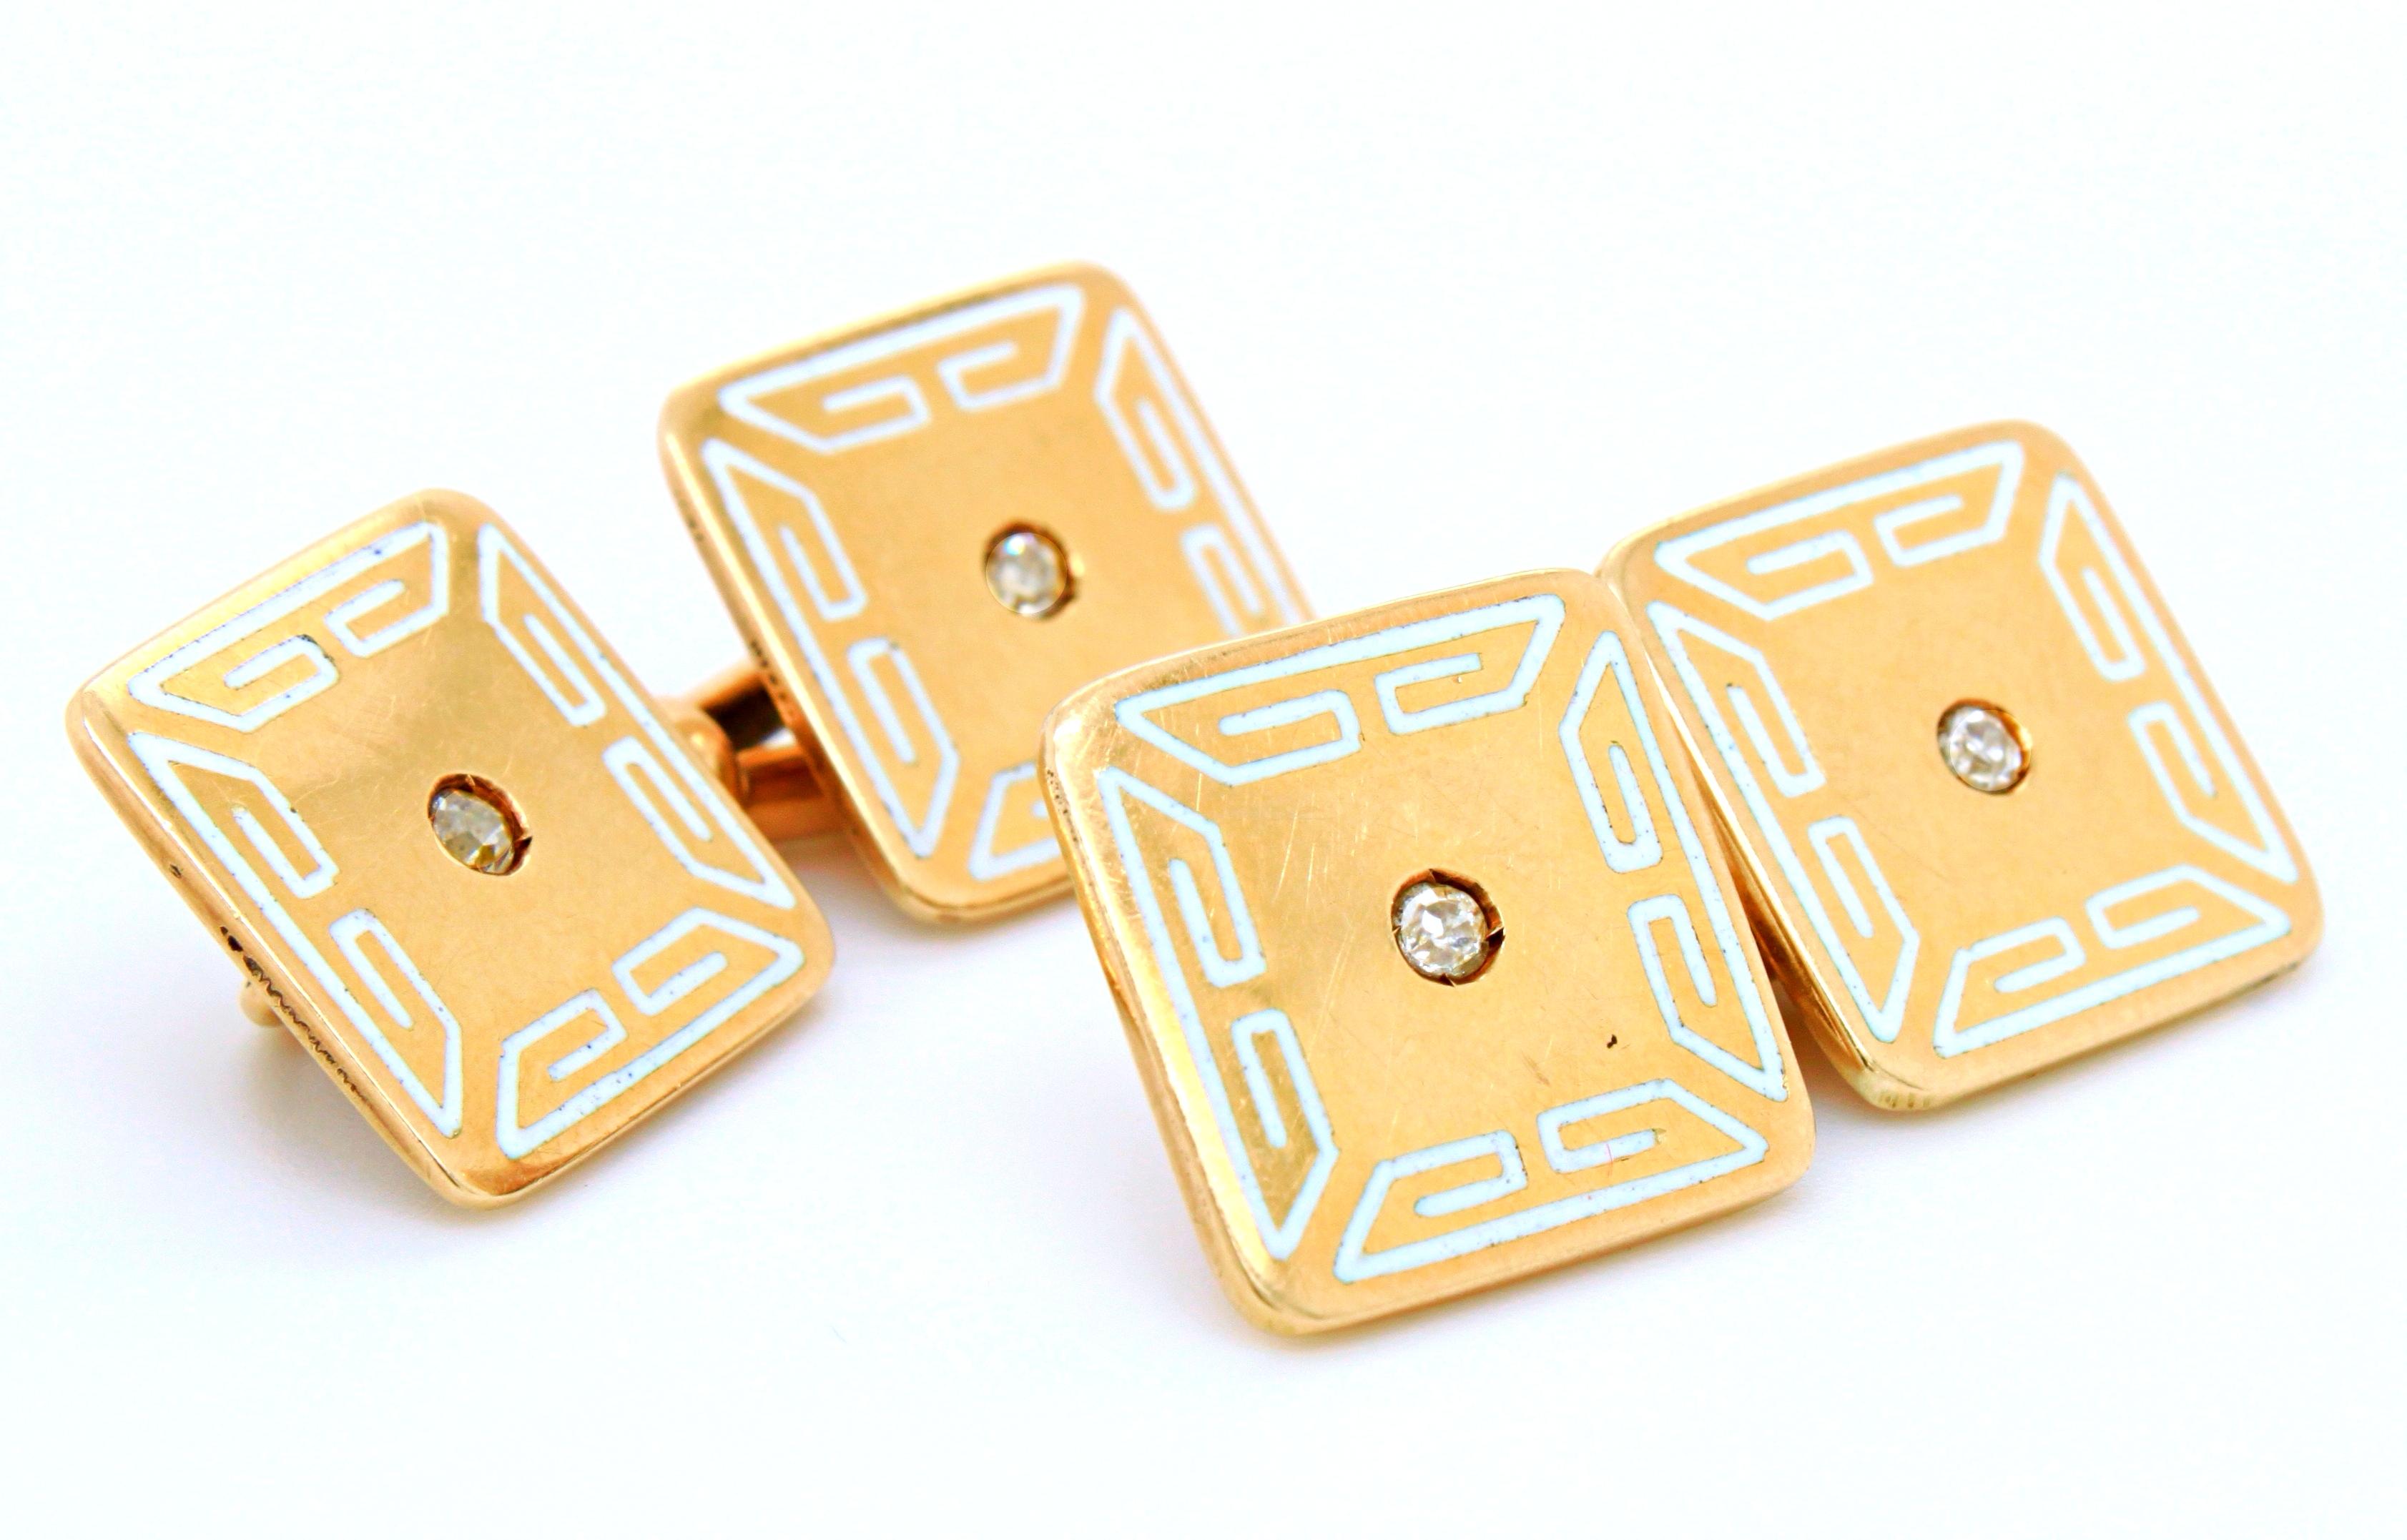 An Art Deco pair of white enamel, diamond and gold cufflinks, ca. 1920s. They are square shaped, each with an old cut diamond in the centre and a geometric white enamel border - inspired by Egyptian architecture.

The elegant combination and